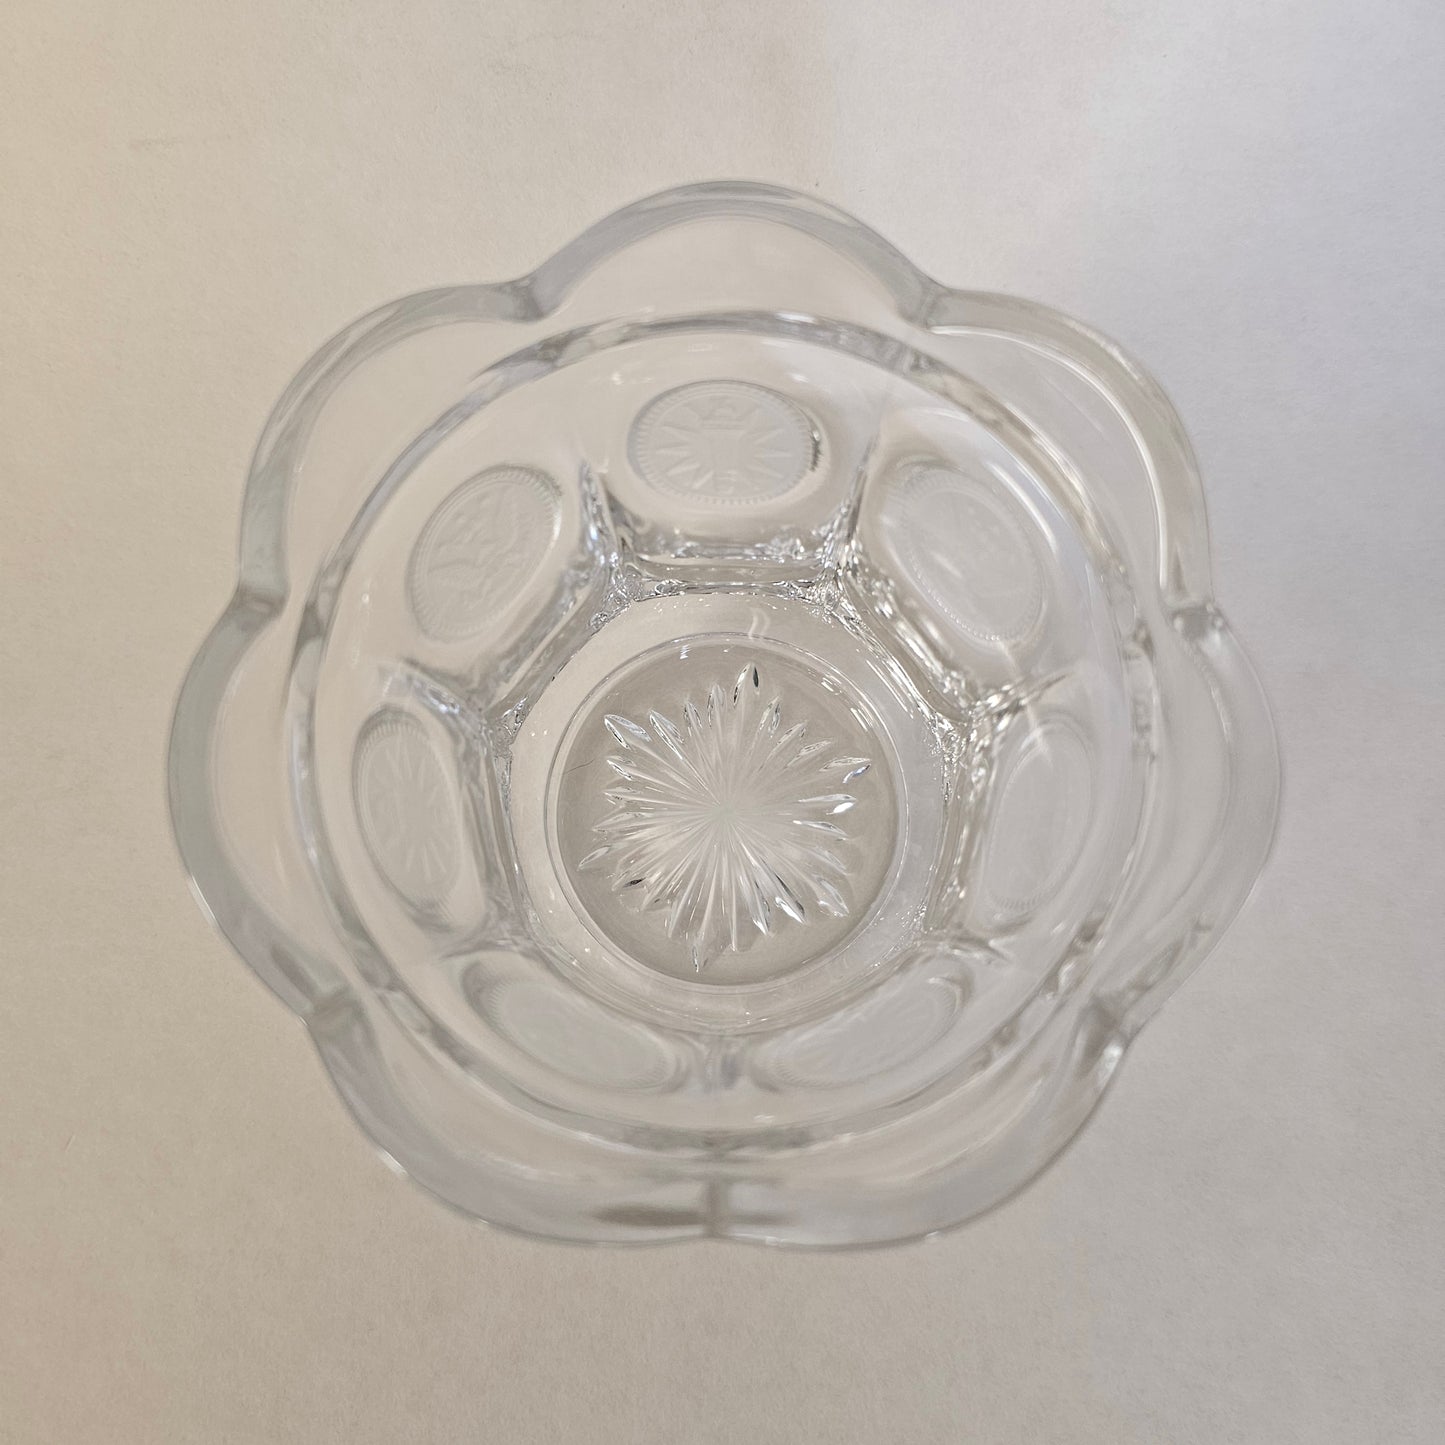 Vintage Fostoria Coin Glass Dish with Lid